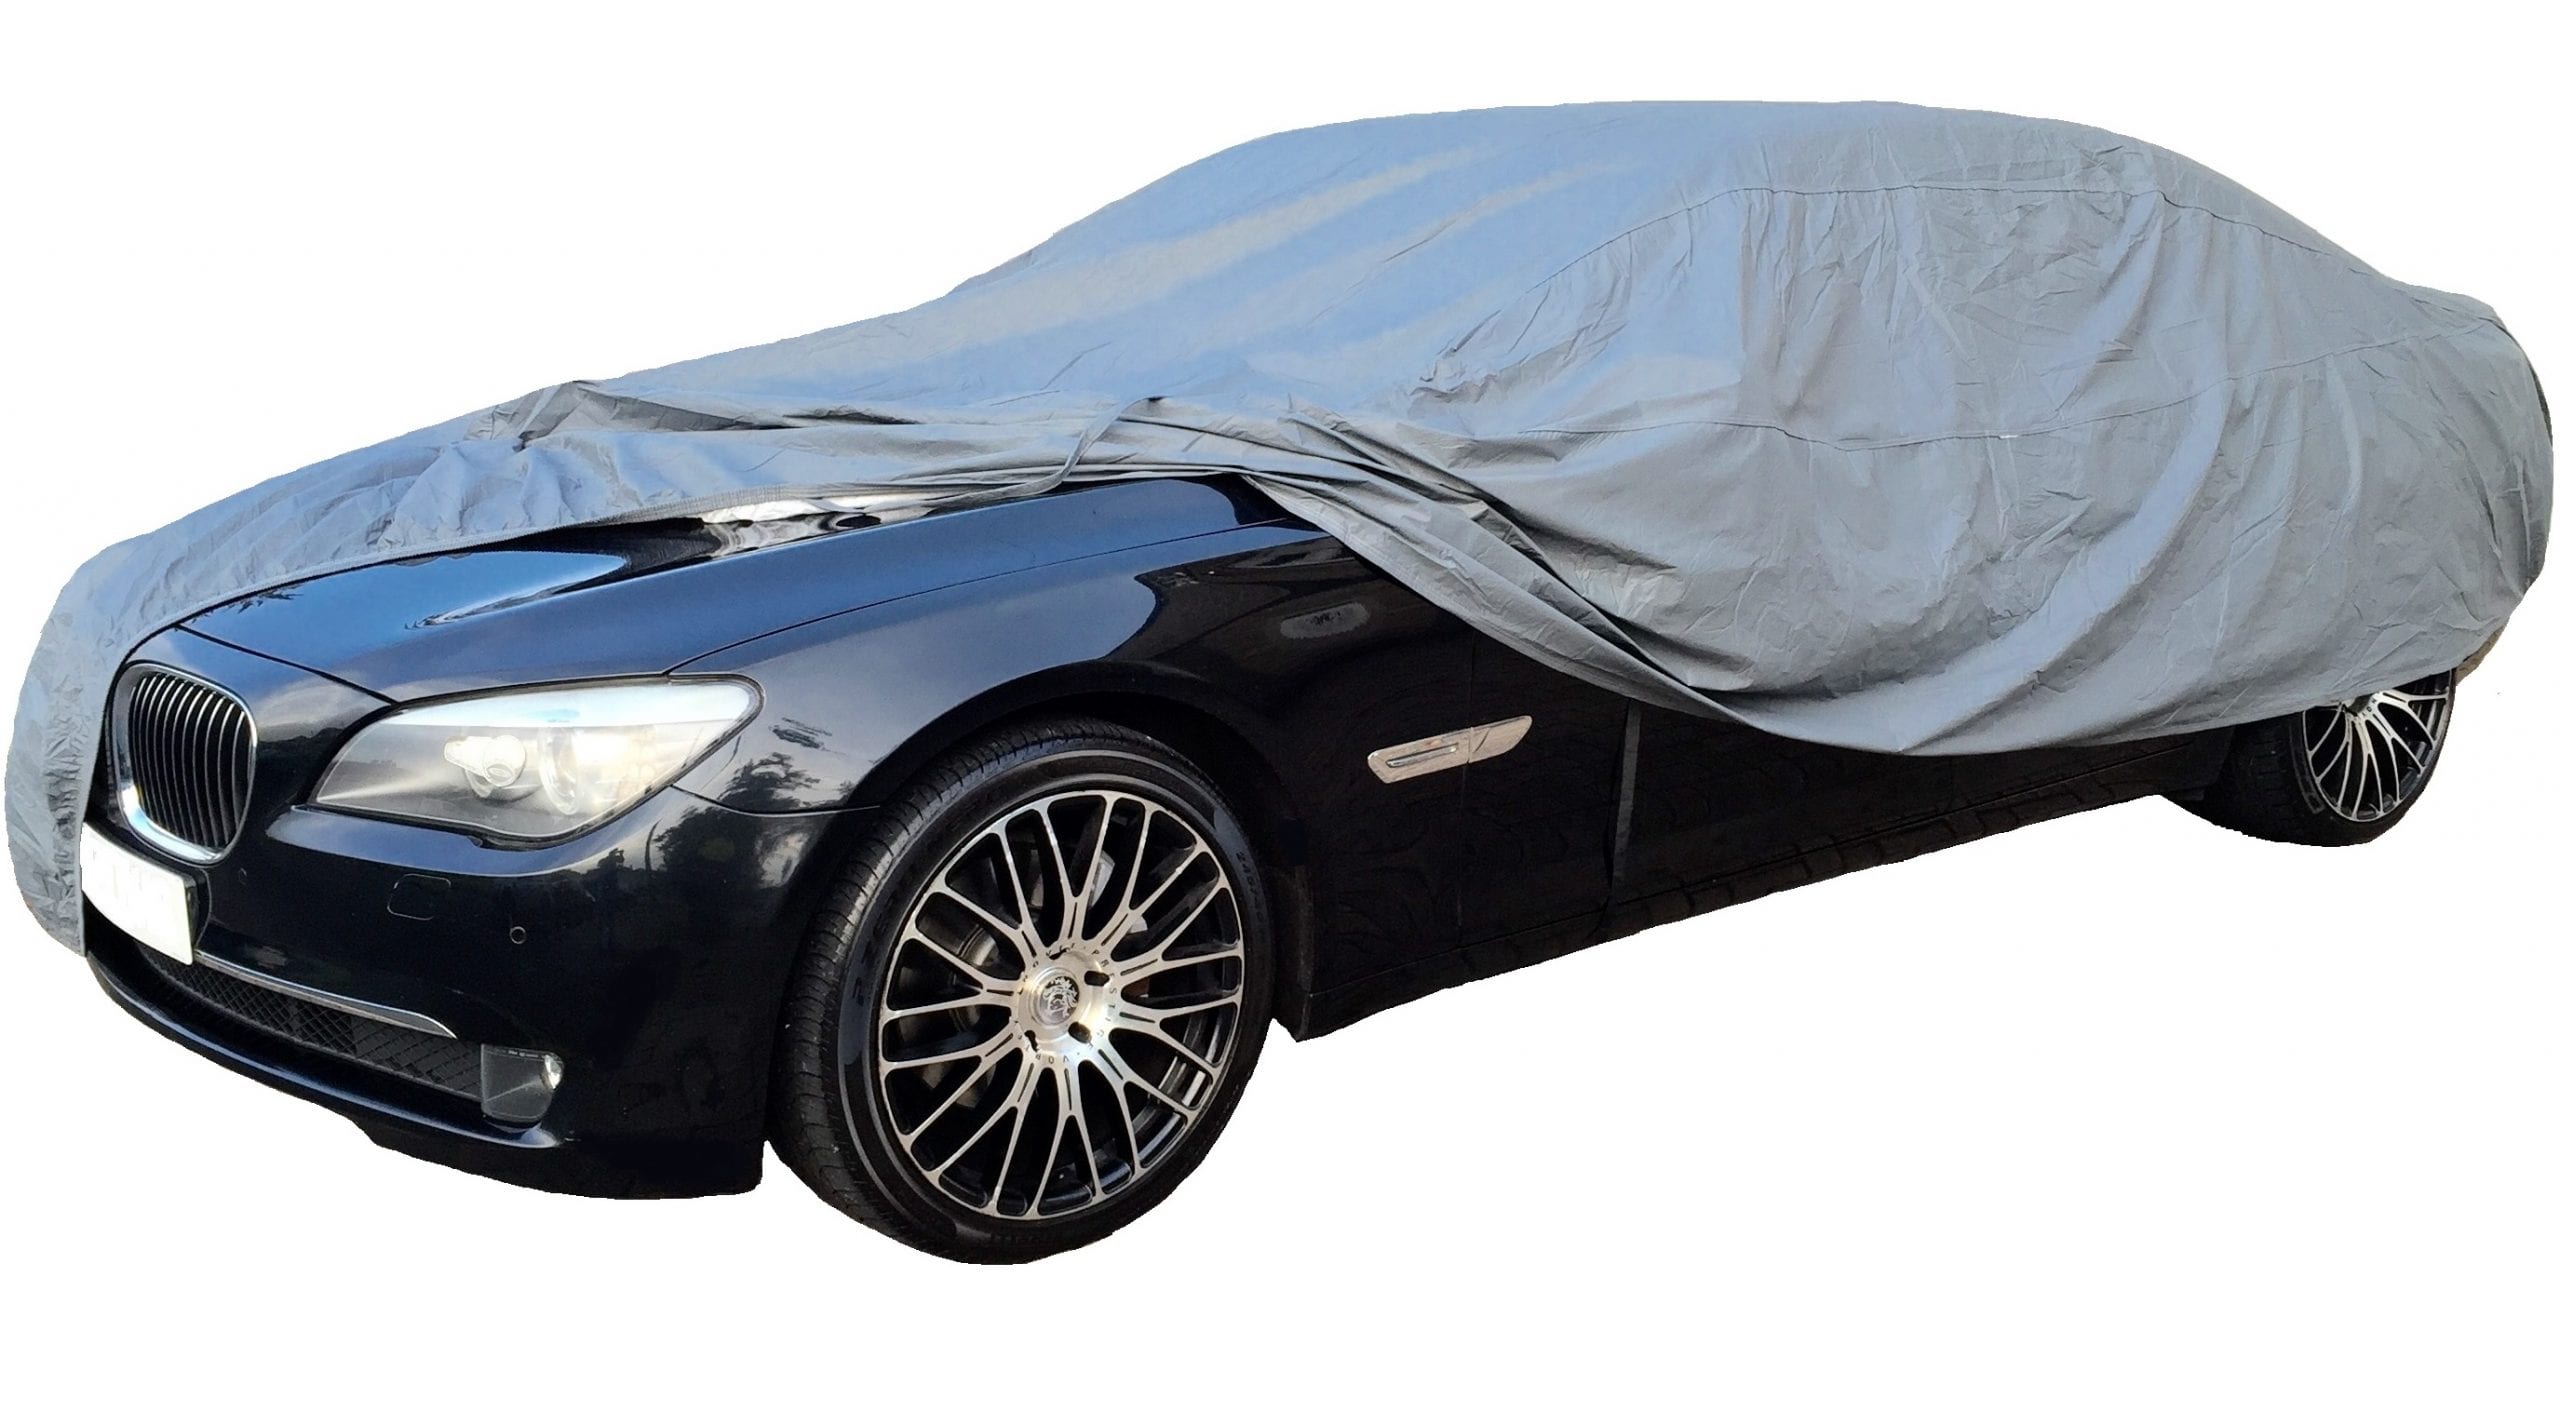  CarCovers Weatherproof Car Cover Compatible with